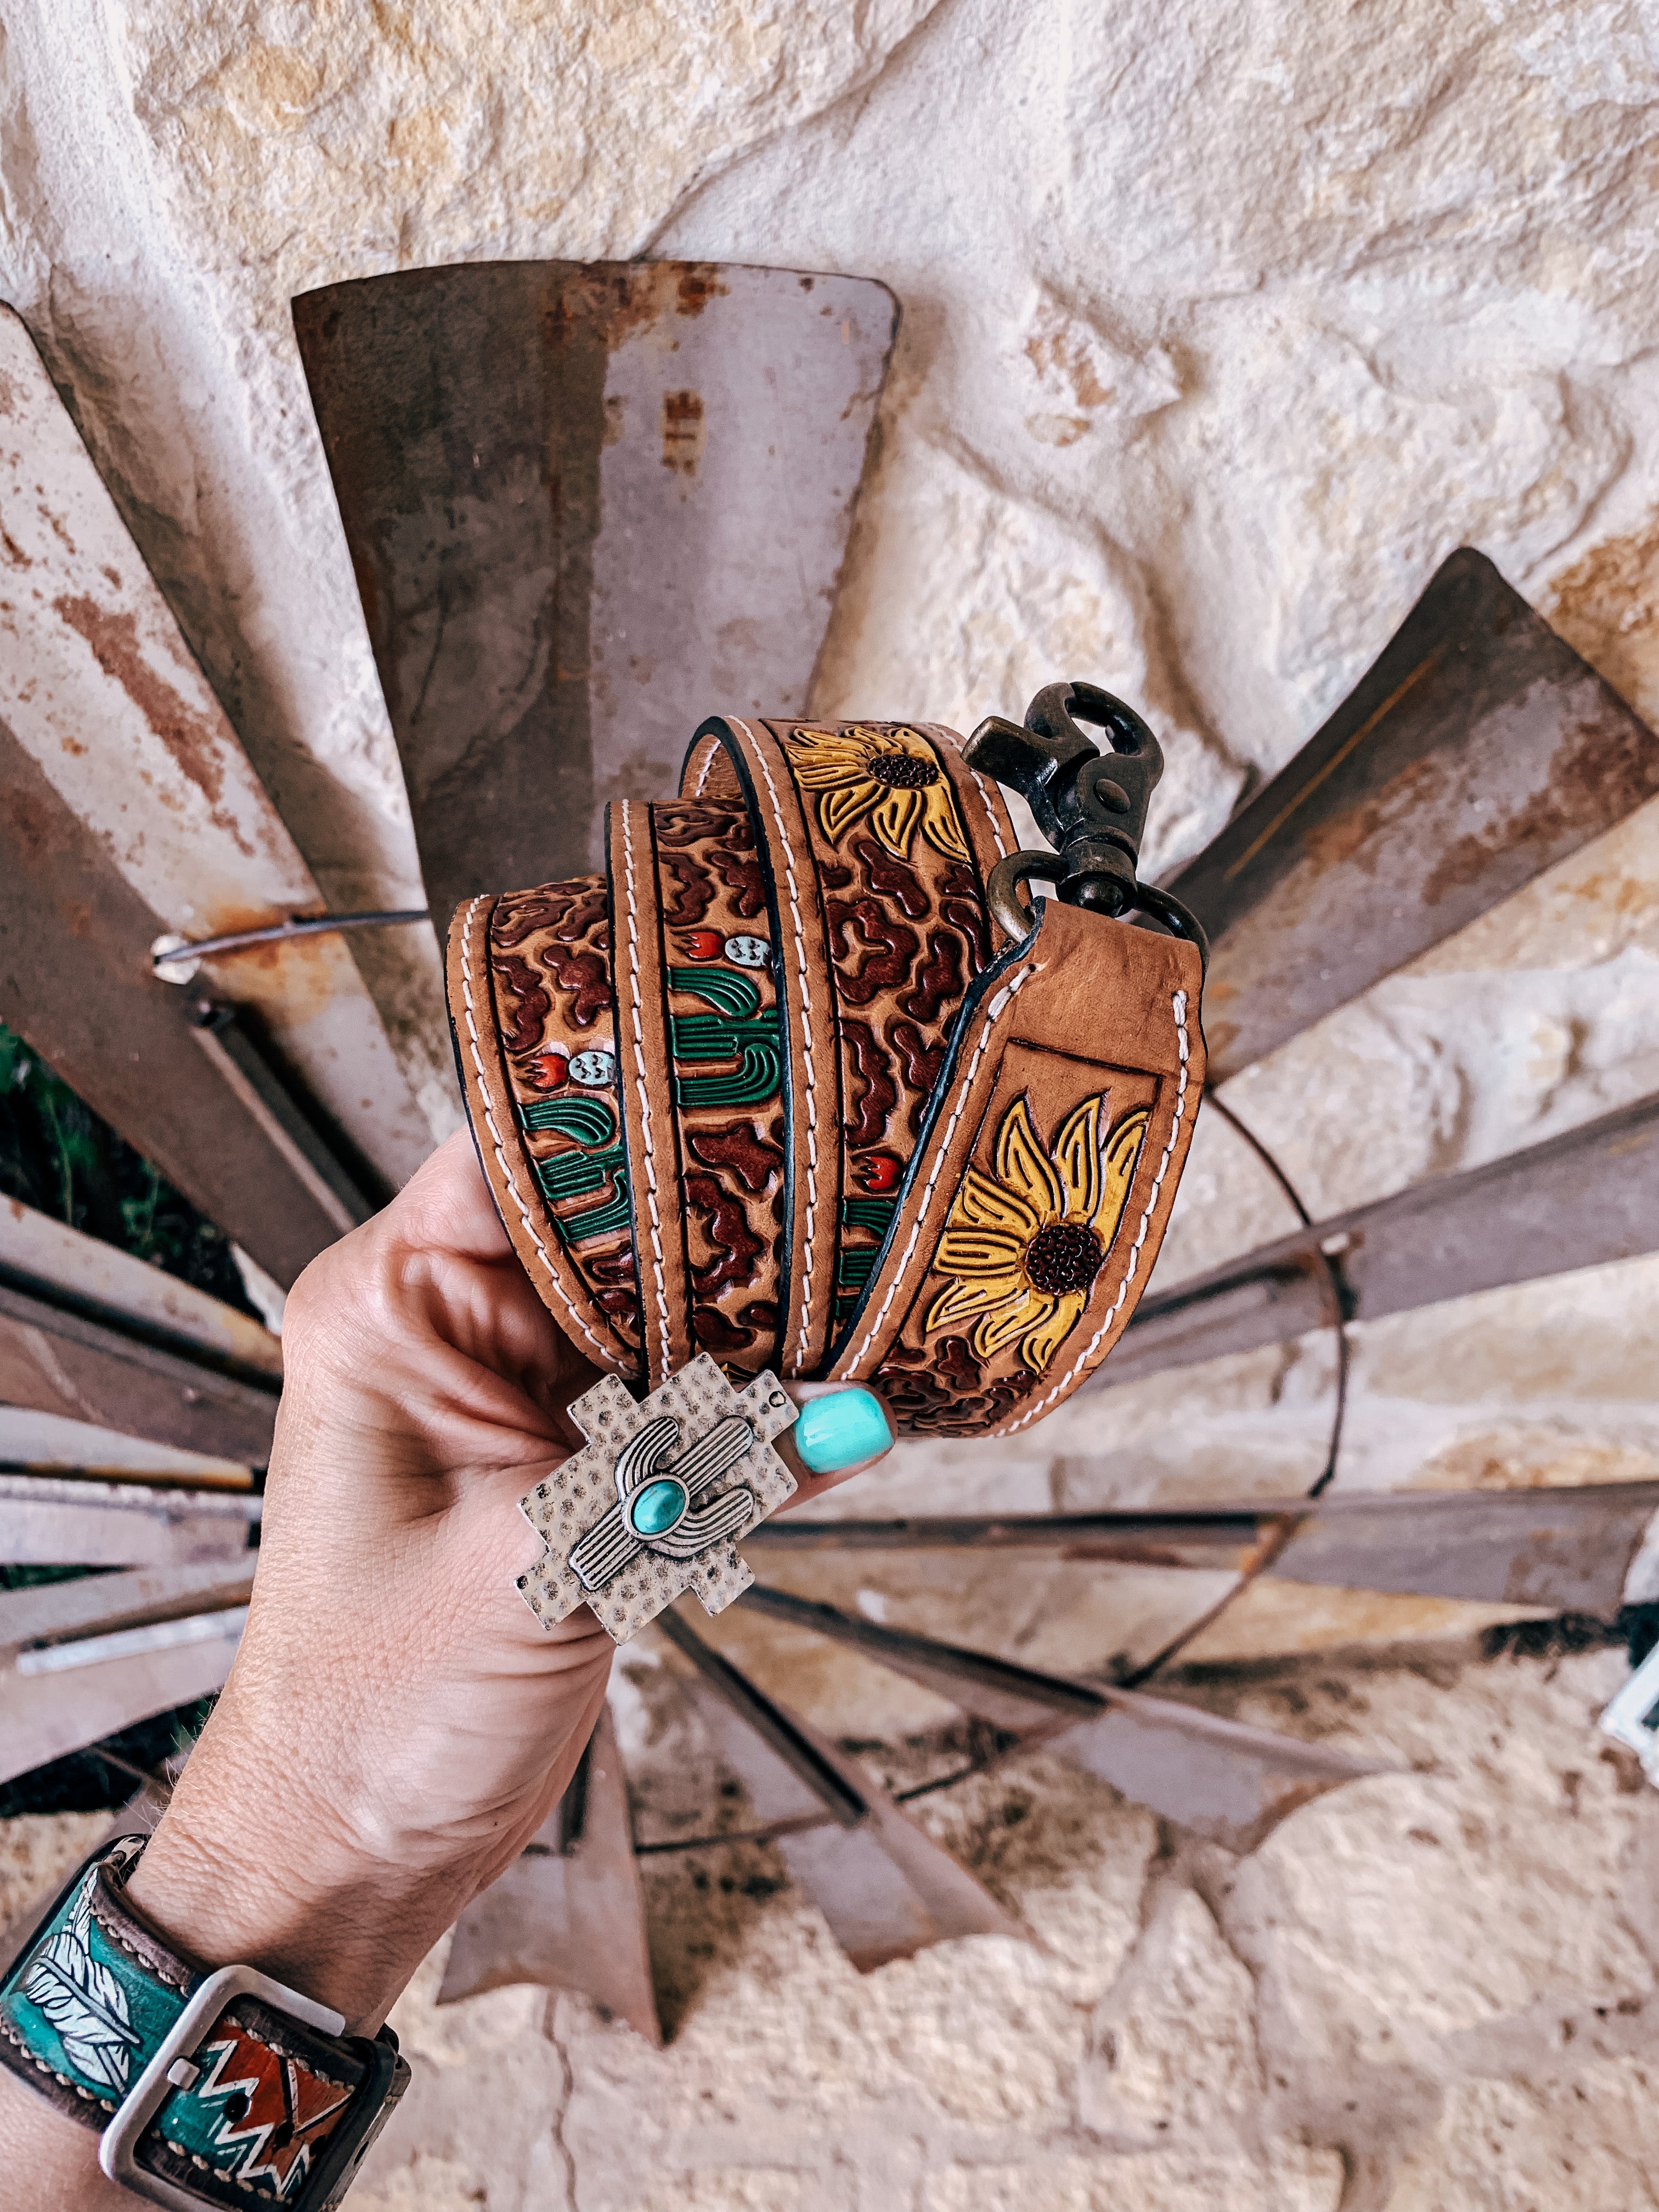 Leather Tooled Purse Strap (Cactus & White Feathers)